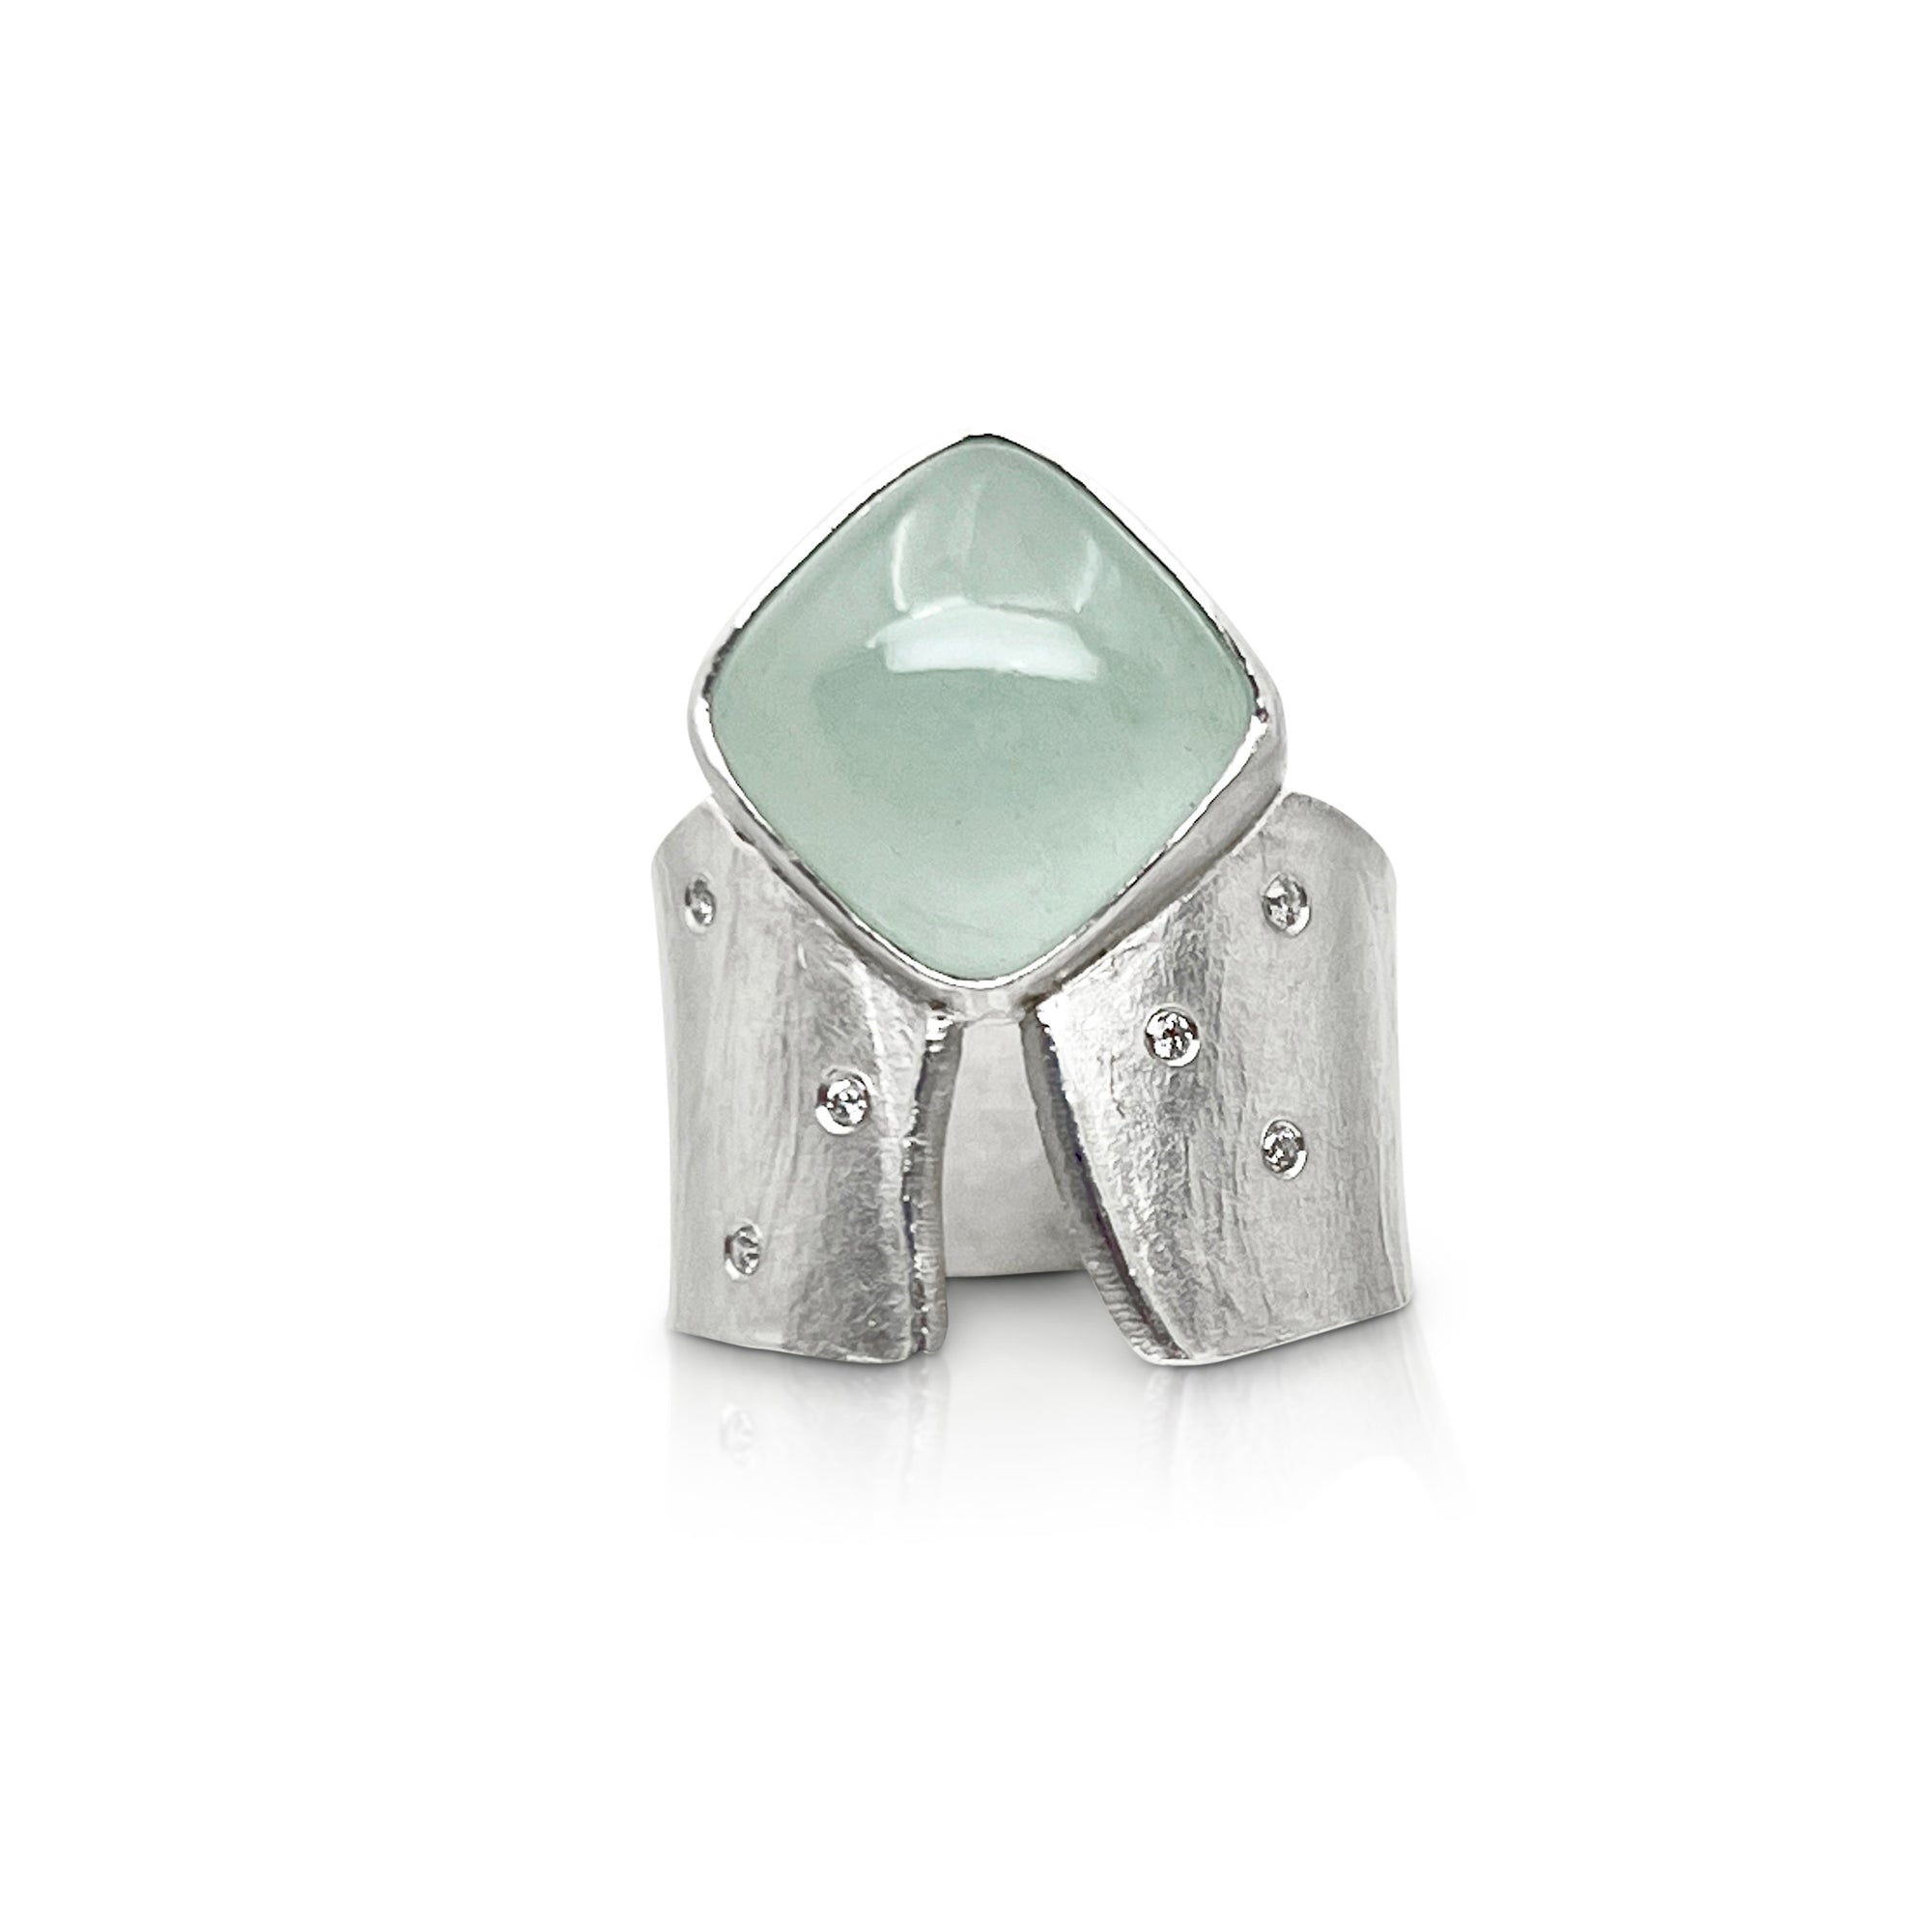 Wide Wafer ring in sterling silver with square Aquamarine cabochon and 6 floating diamonds by Ayesha Mayadas